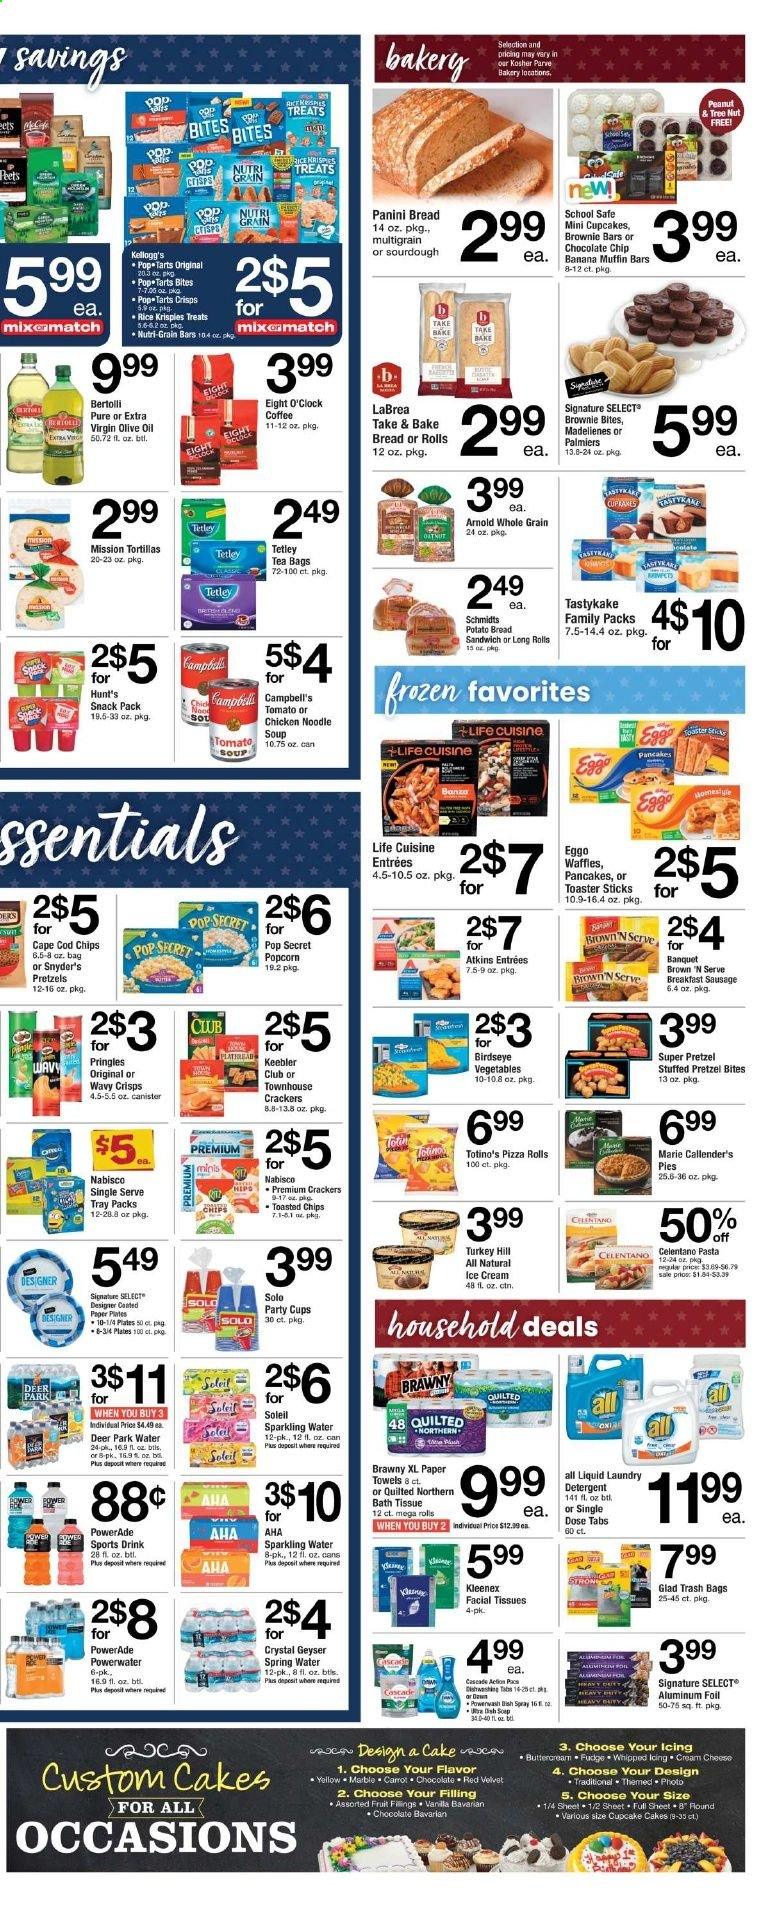 thumbnail - ACME Flyer - 09/03/2021 - 09/09/2021 - Sales products - bread, tortillas, pretzels, cake, pizza rolls, panini, cupcake, brownies, muffin, cod, Campbell's, pizza, soup, pasta, pancakes, Bird's Eye, noodles, Marie Callender's, Bertolli, sausage, Brown 'N Serve, ice cream, fudge, crackers, Kellogg's, Pop-Tarts, Nutri-Grain bars, Keebler, Pringles, popcorn, Rice Krispies, Nutri-Grain, extra virgin olive oil, olive oil, Powerade, spring water, sparkling water, tea bags, coffee, Eight O'Clock, bath tissue, Kleenex, Quilted Northern, kitchen towels, paper towels, detergent, Cascade, laundry detergent, facial tissues, trash bags, plate, cup, aluminium foil, party cups, toaster. Page 3.